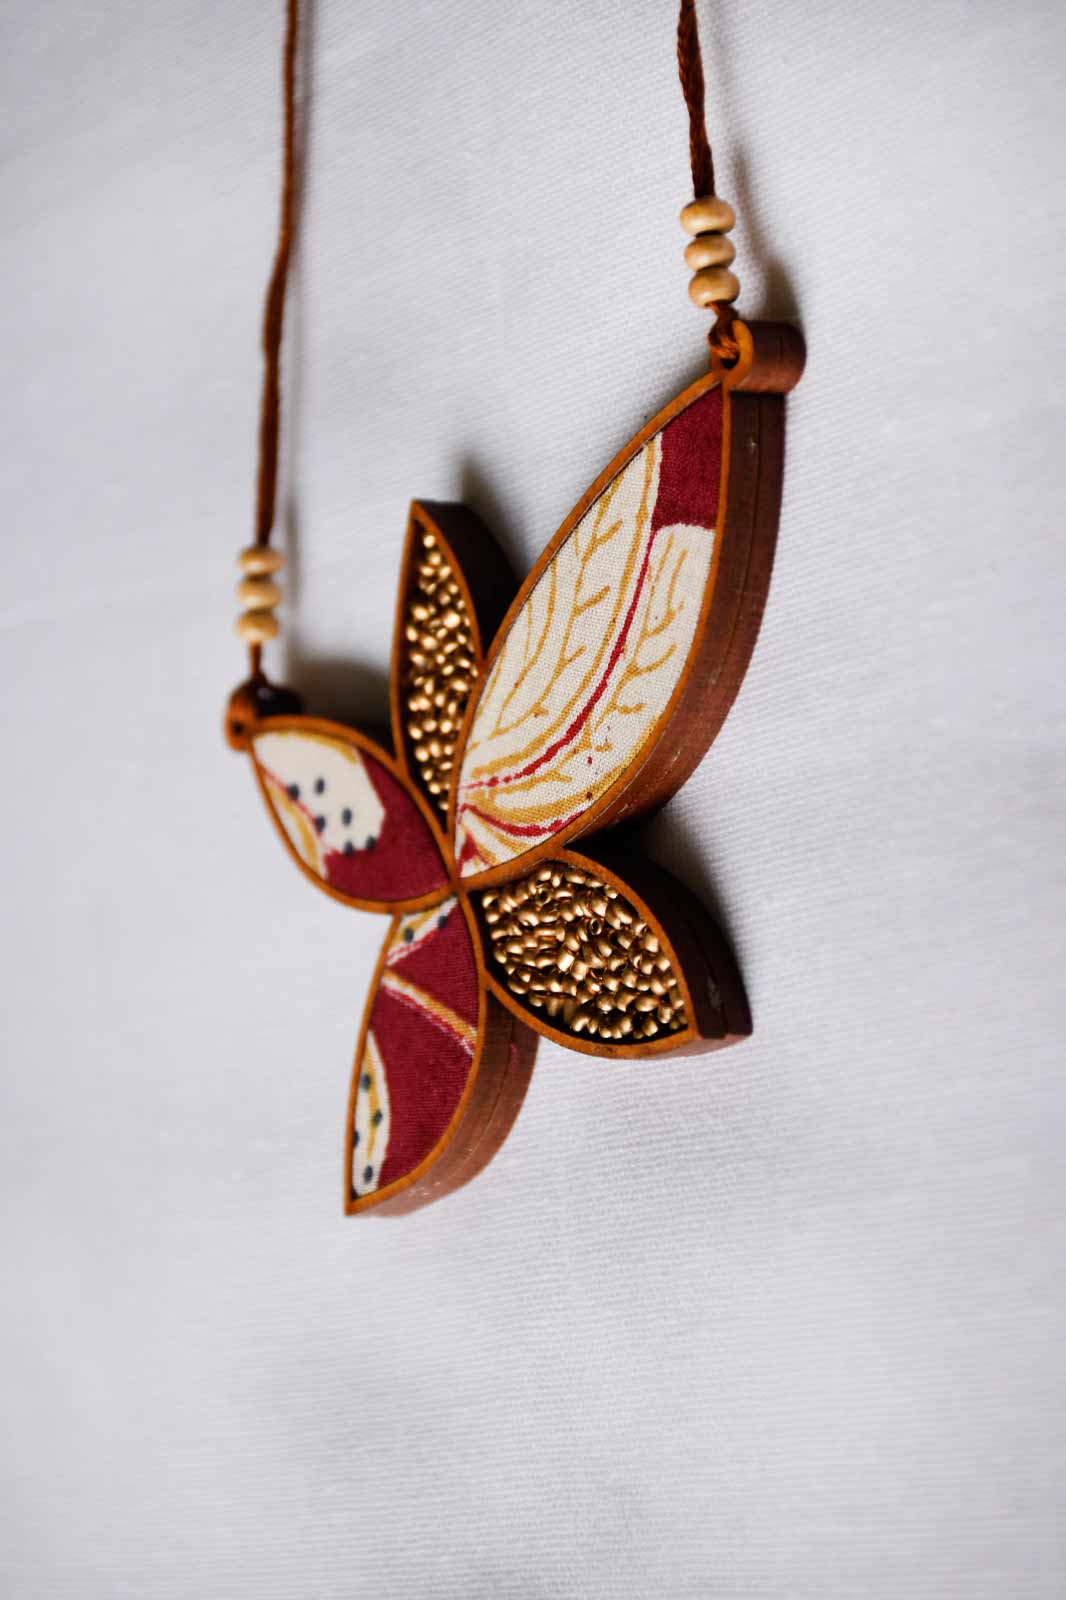 Sepia stories, Handmade products online, 100% Natural fashion accessories online, Best organic online store, Organic brands online, Fashion accessories online, Online store, Praful Makhwana, Mister and Mister, Socially conscious brand, Indian handmade products, Indian accessories, necklace online, shop handmade necklace for women, handmade necklace, shop necklace online, creative necklace, designer necklace, Indian handmade necklace, necklace for women, designer necklace, organic necklace brand, everyday necklace